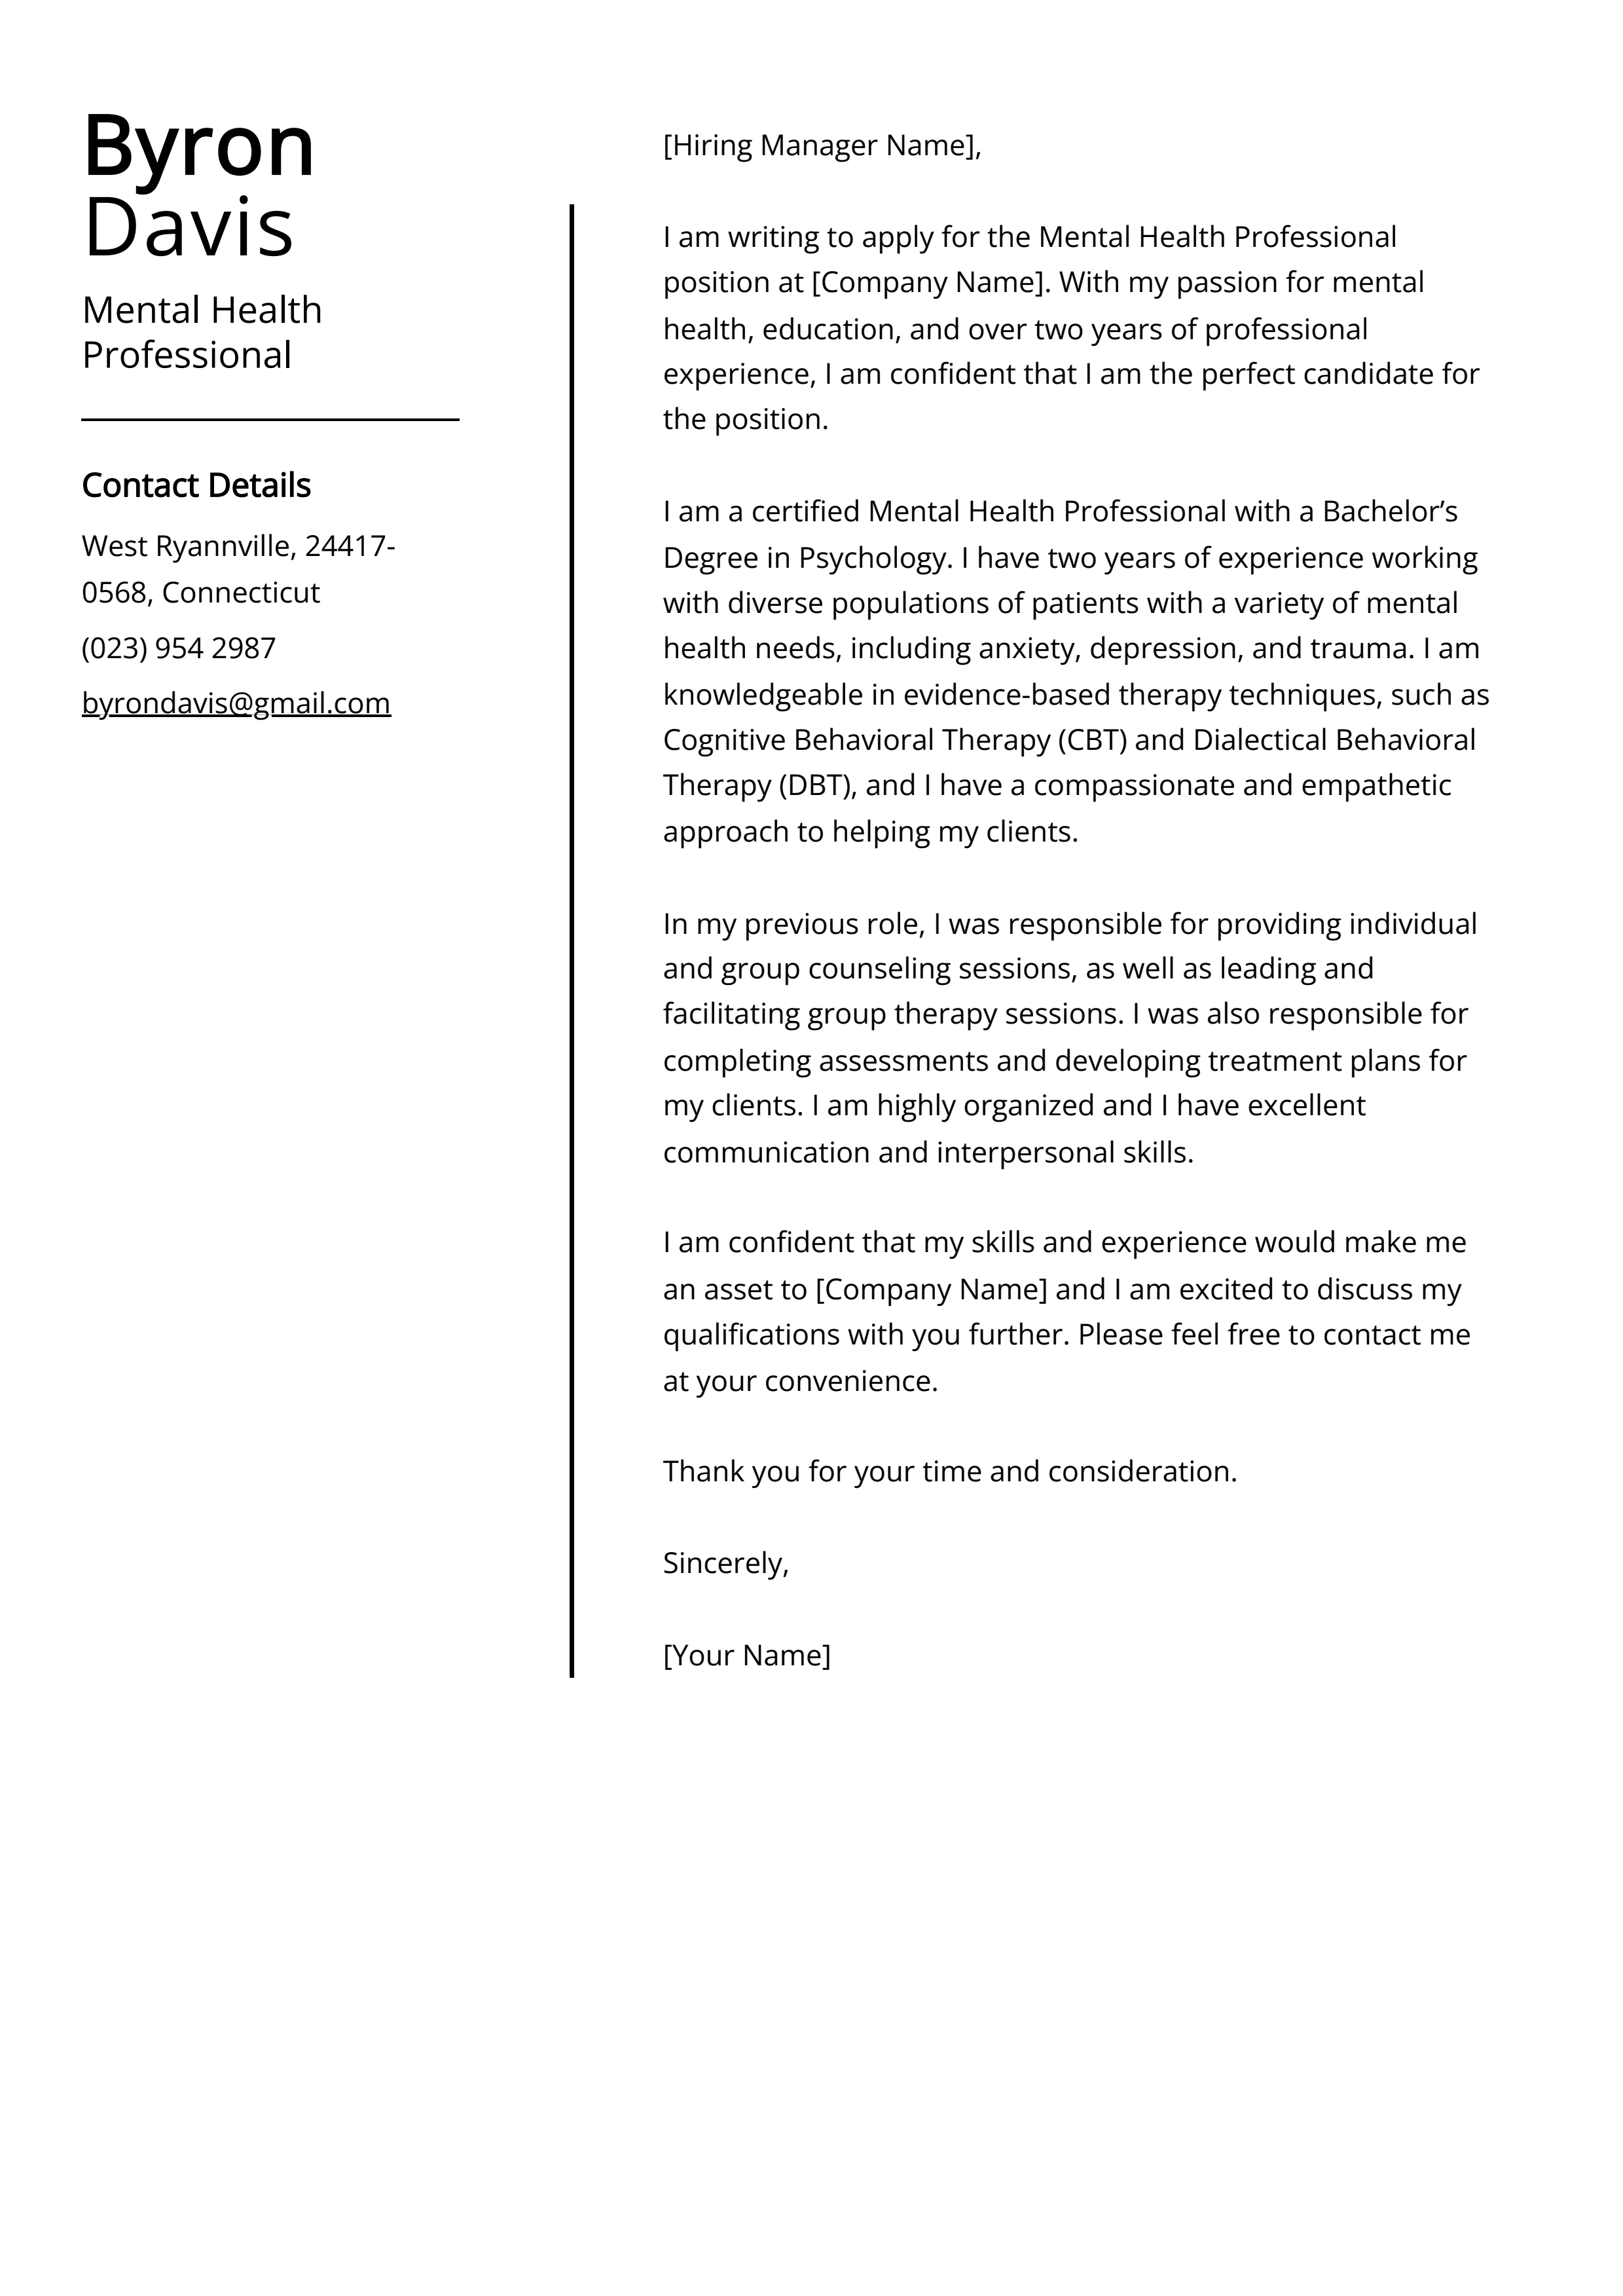 Mental Health Professional Cover Letter Example